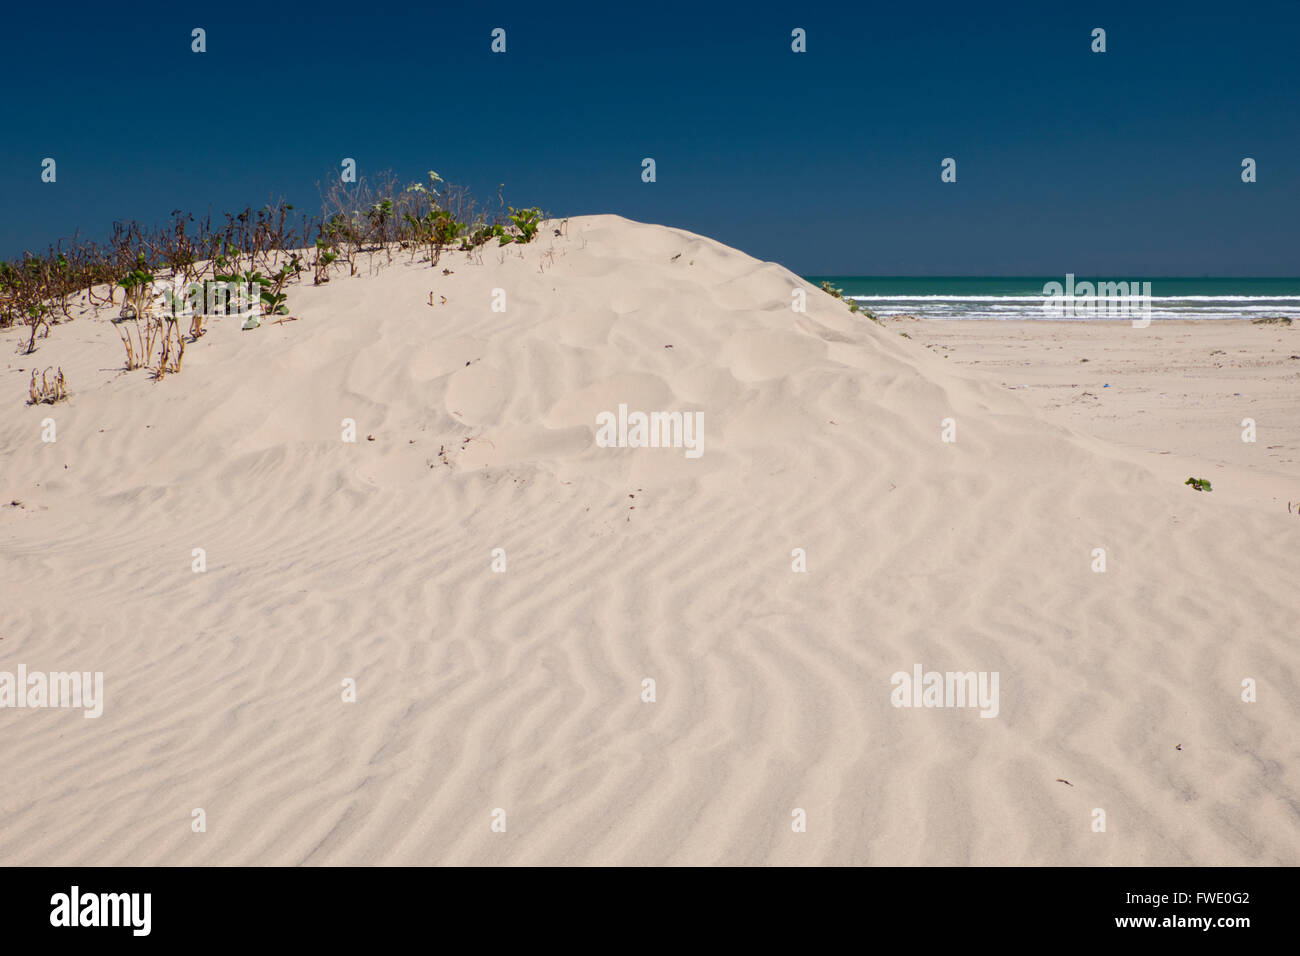 Sand dune on South Padre Island, Texas, USA, with Gulf of Mexico in the background. Stock Photo